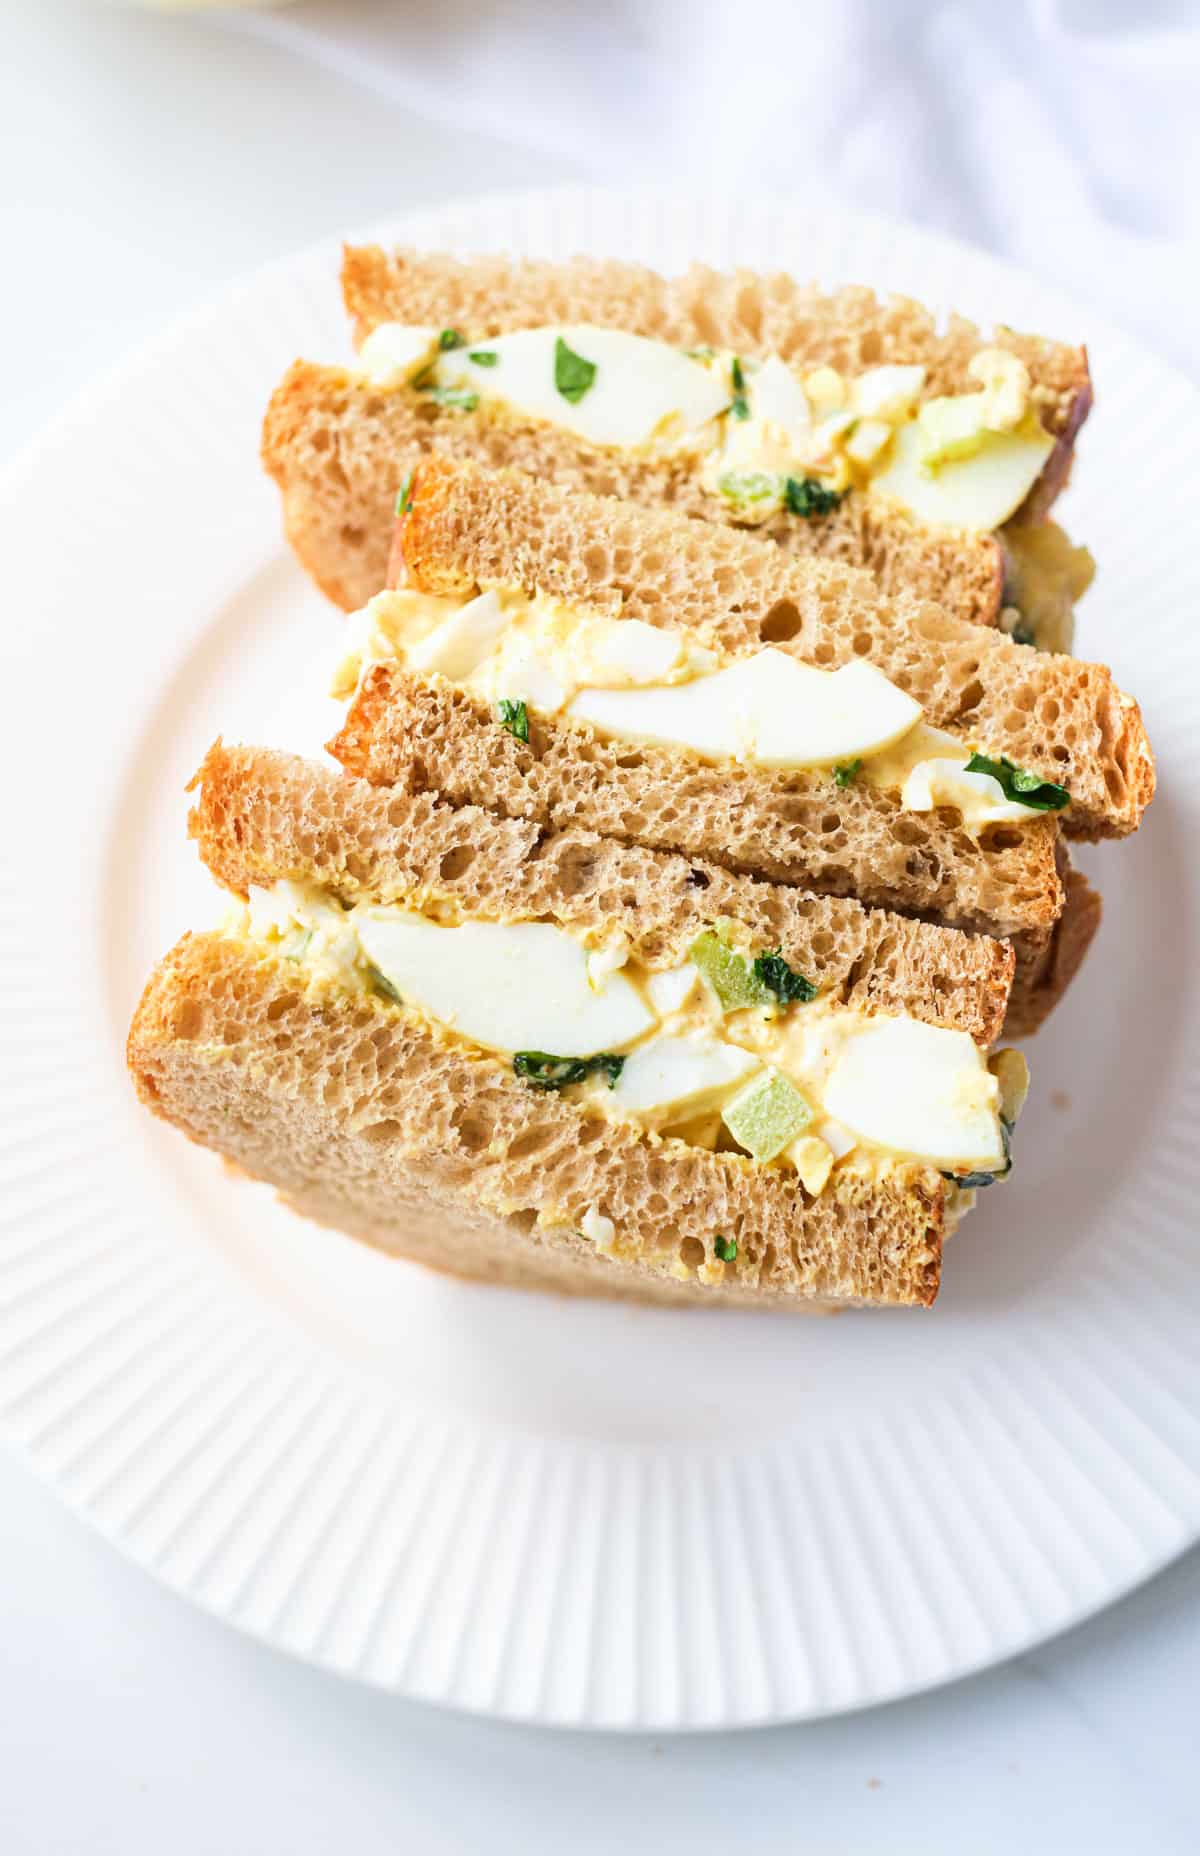 the completed egg salad sandwich cut in half and served on a white plate